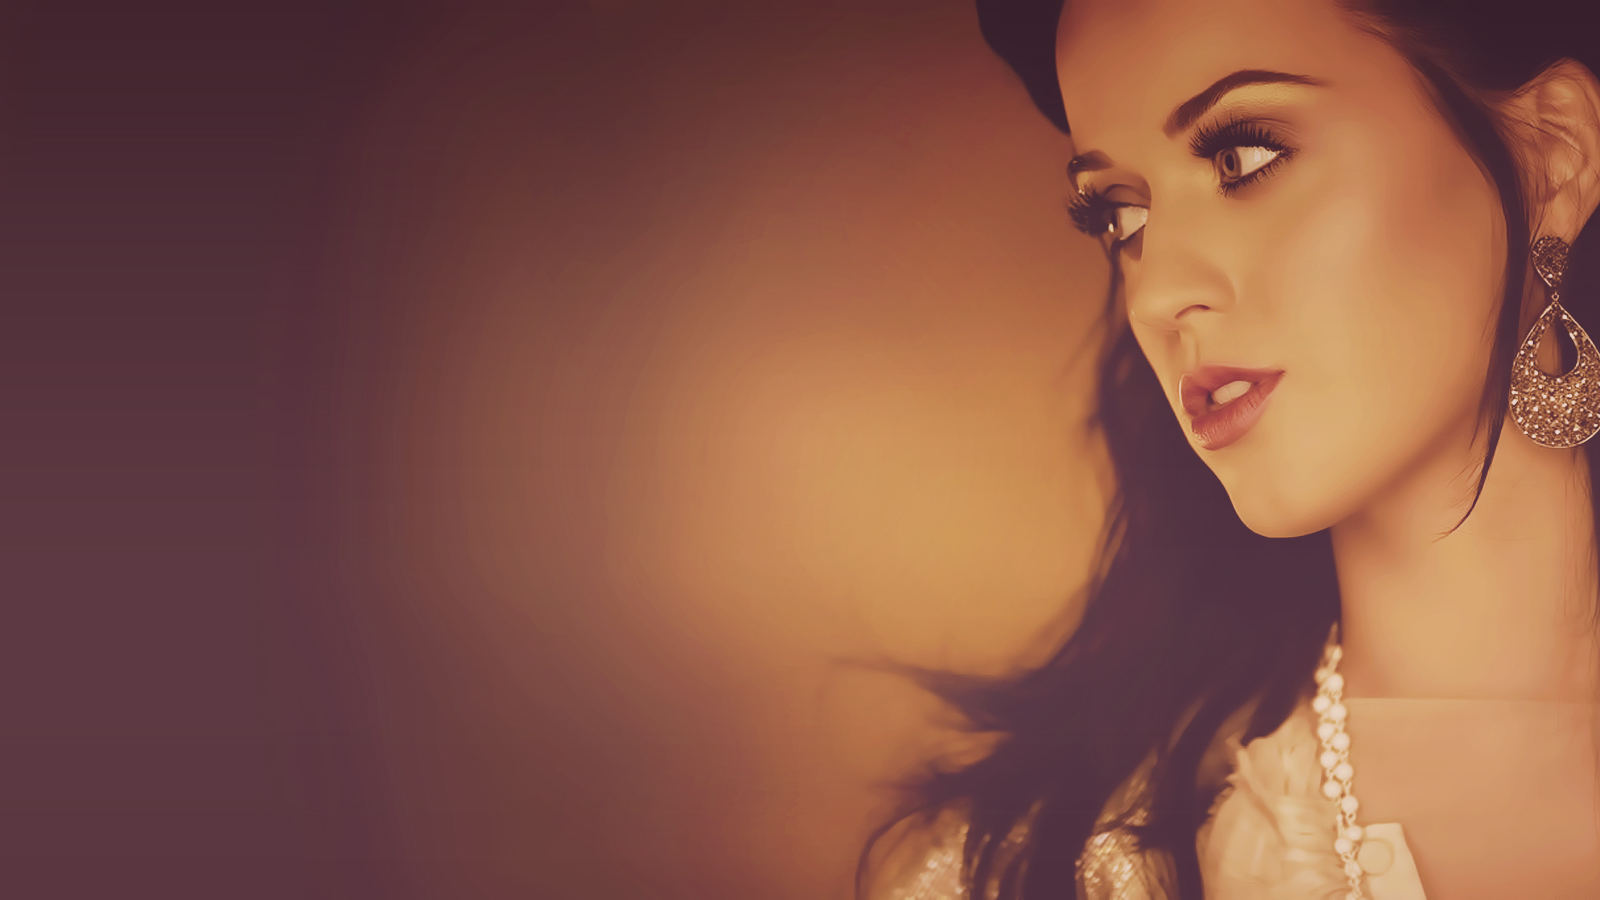 Music Katy Perry 1600x900